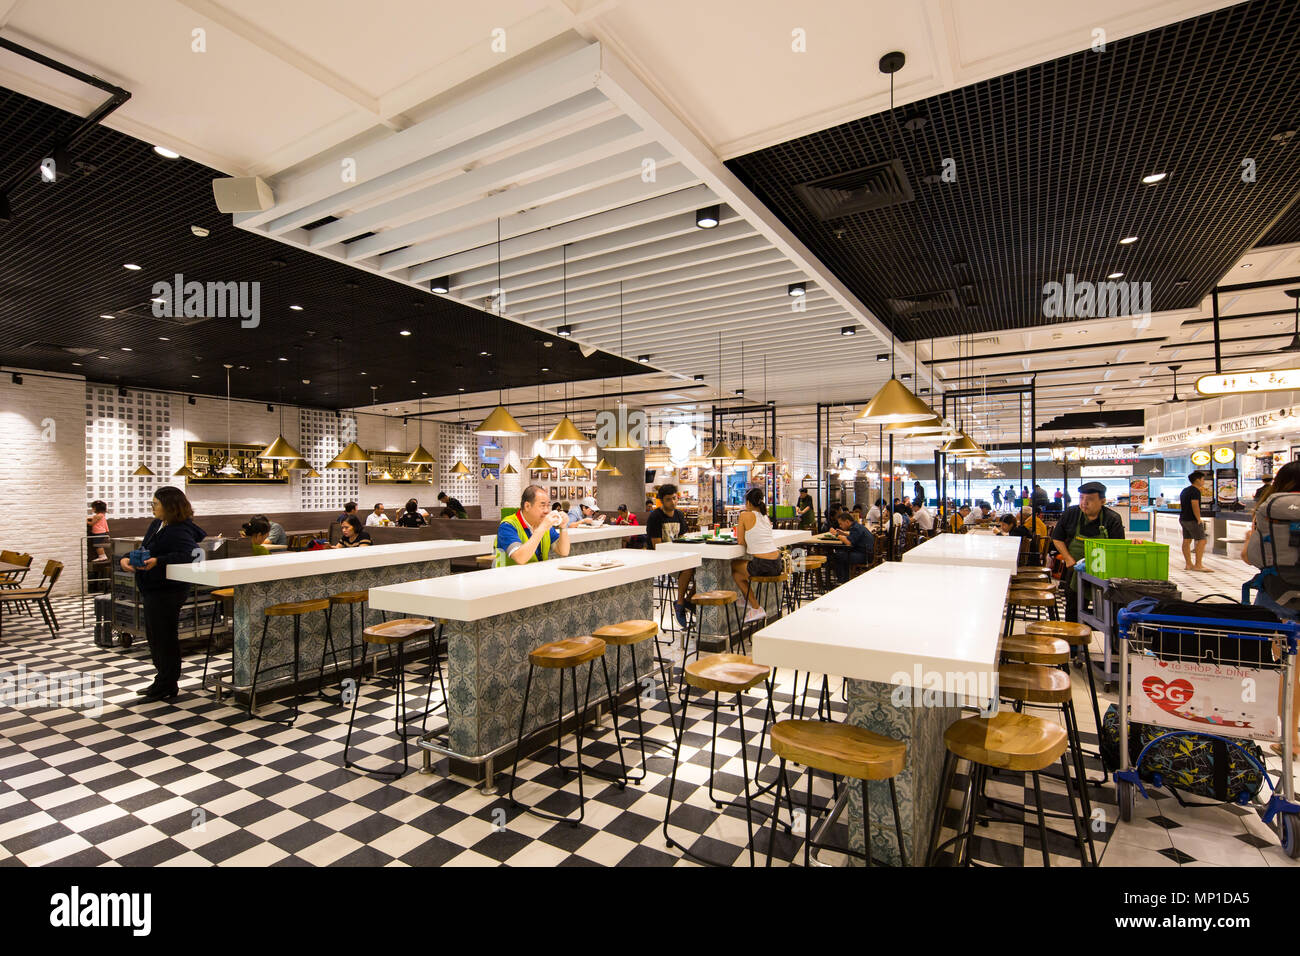 Interior design layout of Food Emporium or commonly know as food court or dinning area at Singapore Changi Airport terminal 4. Stock Photo